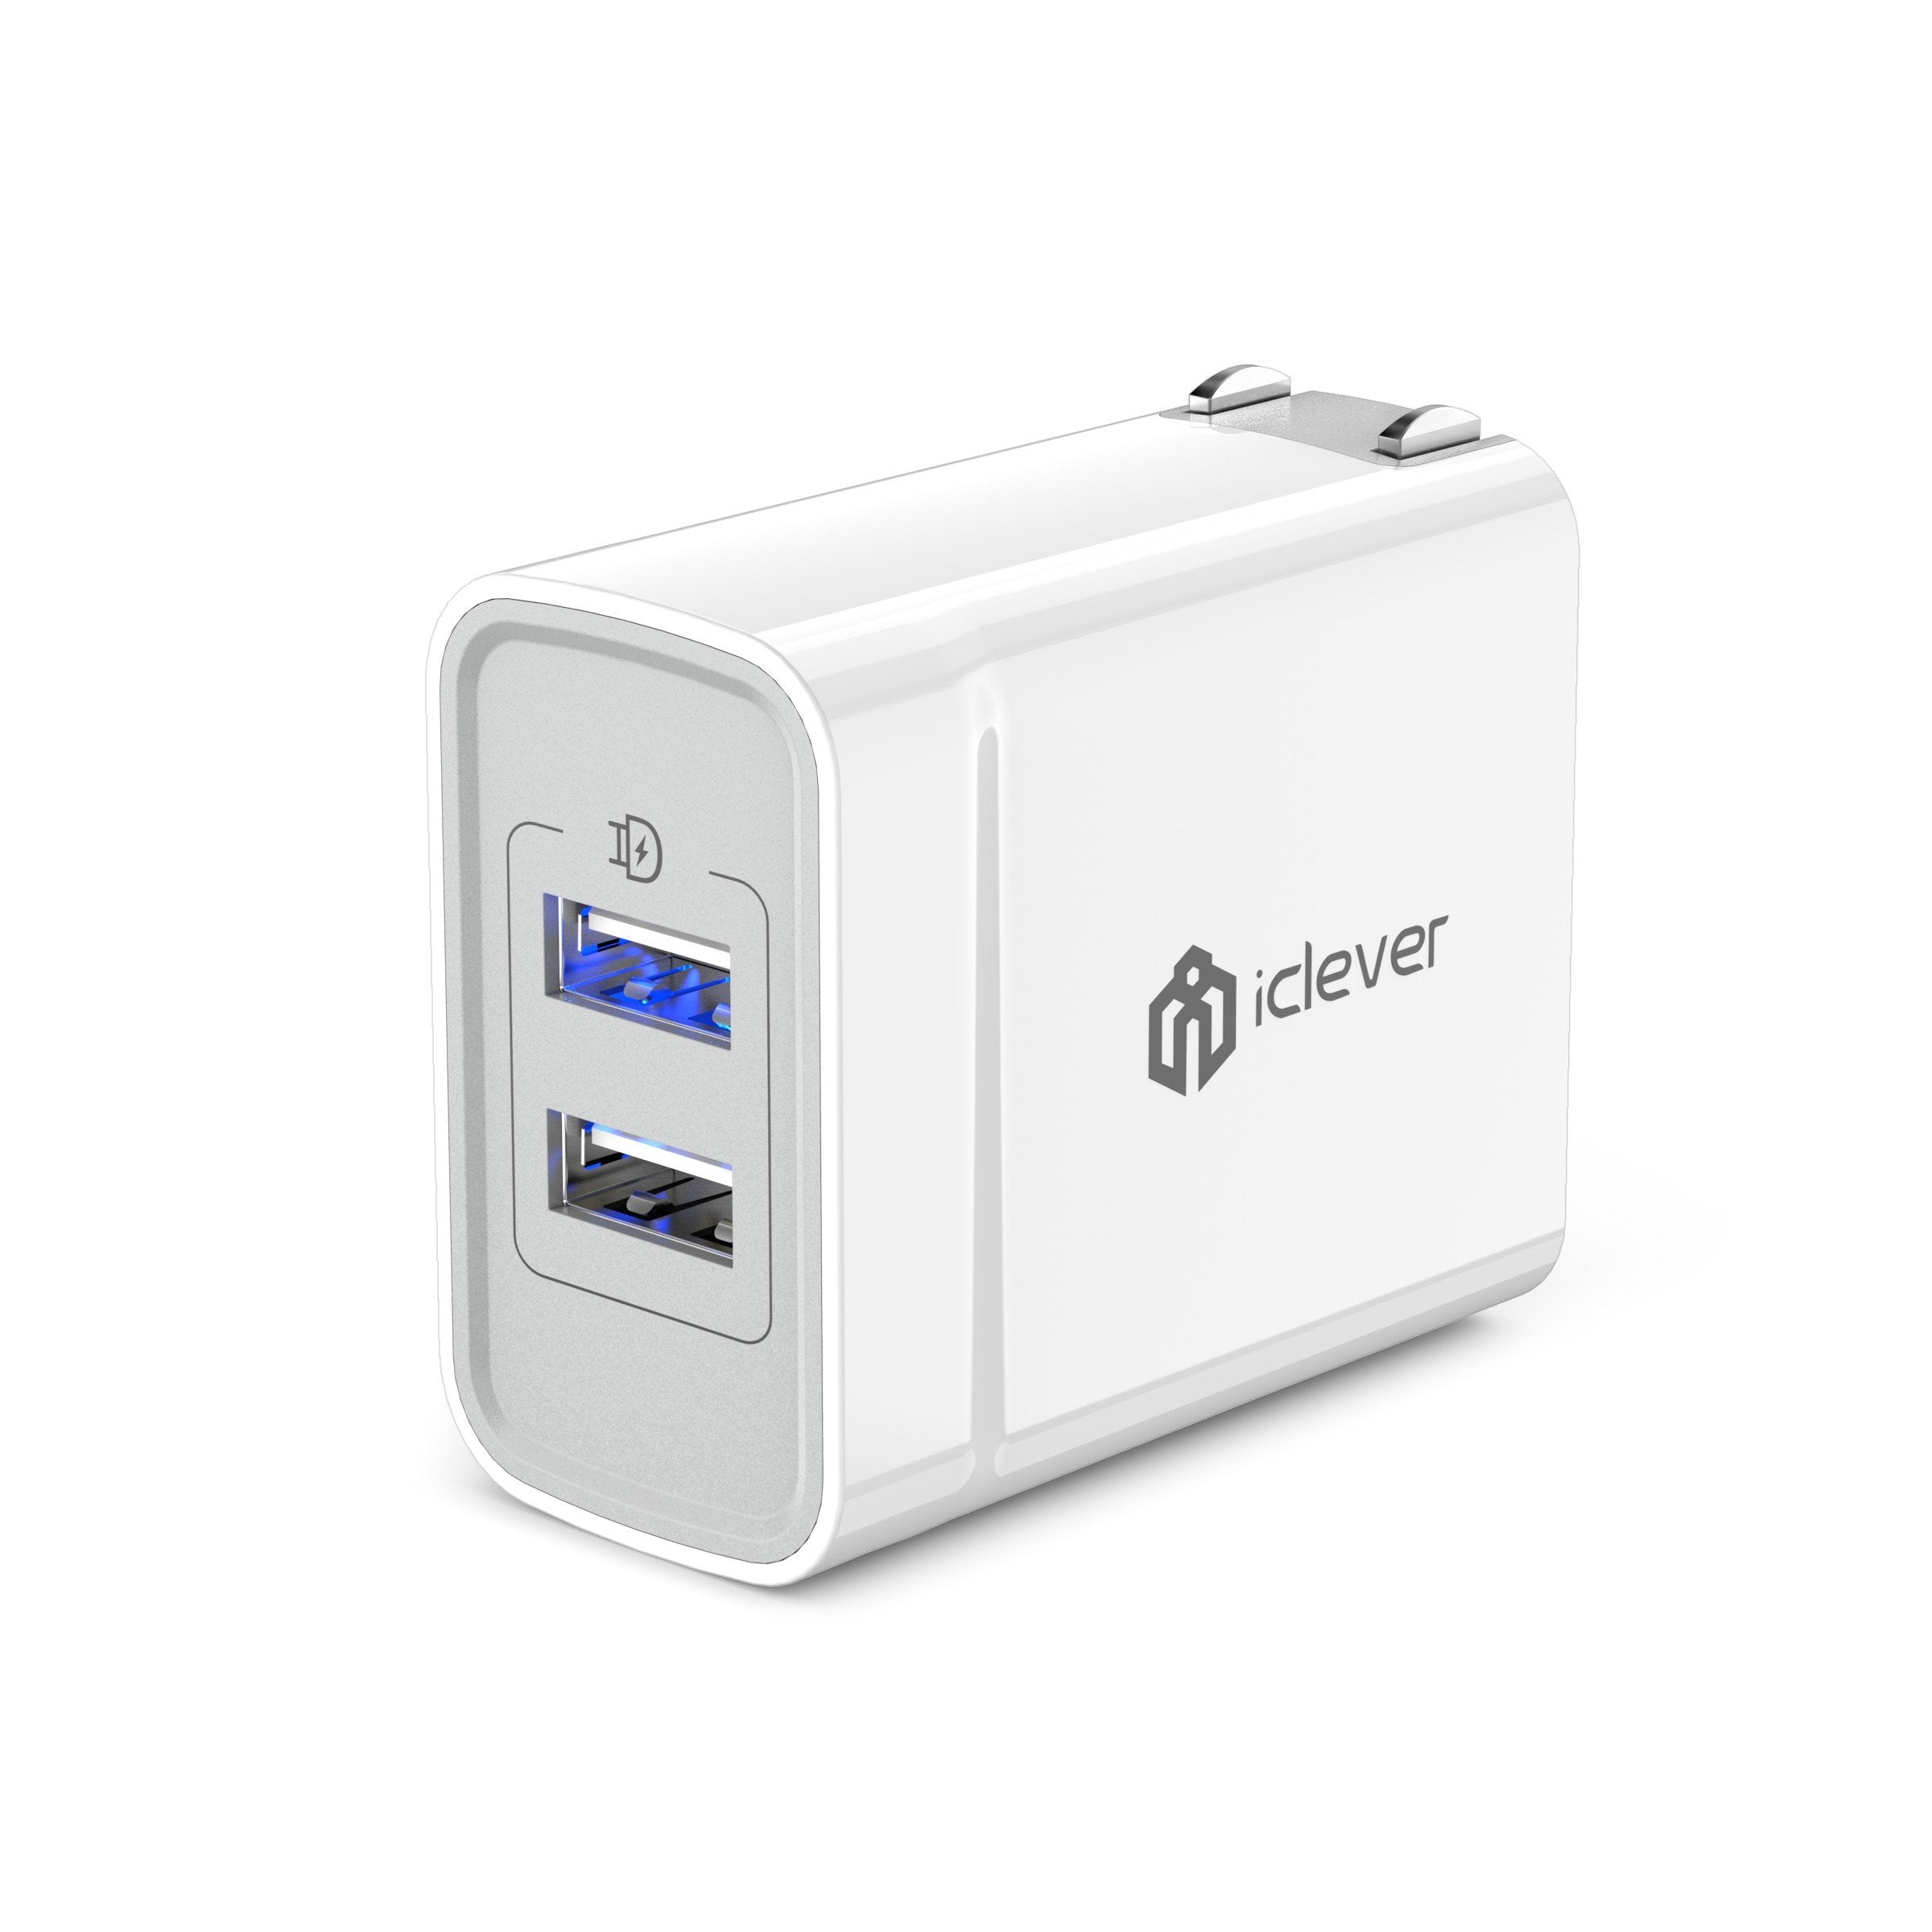 iClever 24W Dual USB Wall Charger with 2 SmartID Charging Port(5V/2.4A Each), Portable Travel Charger with 100-240V Input, Foldable Plug